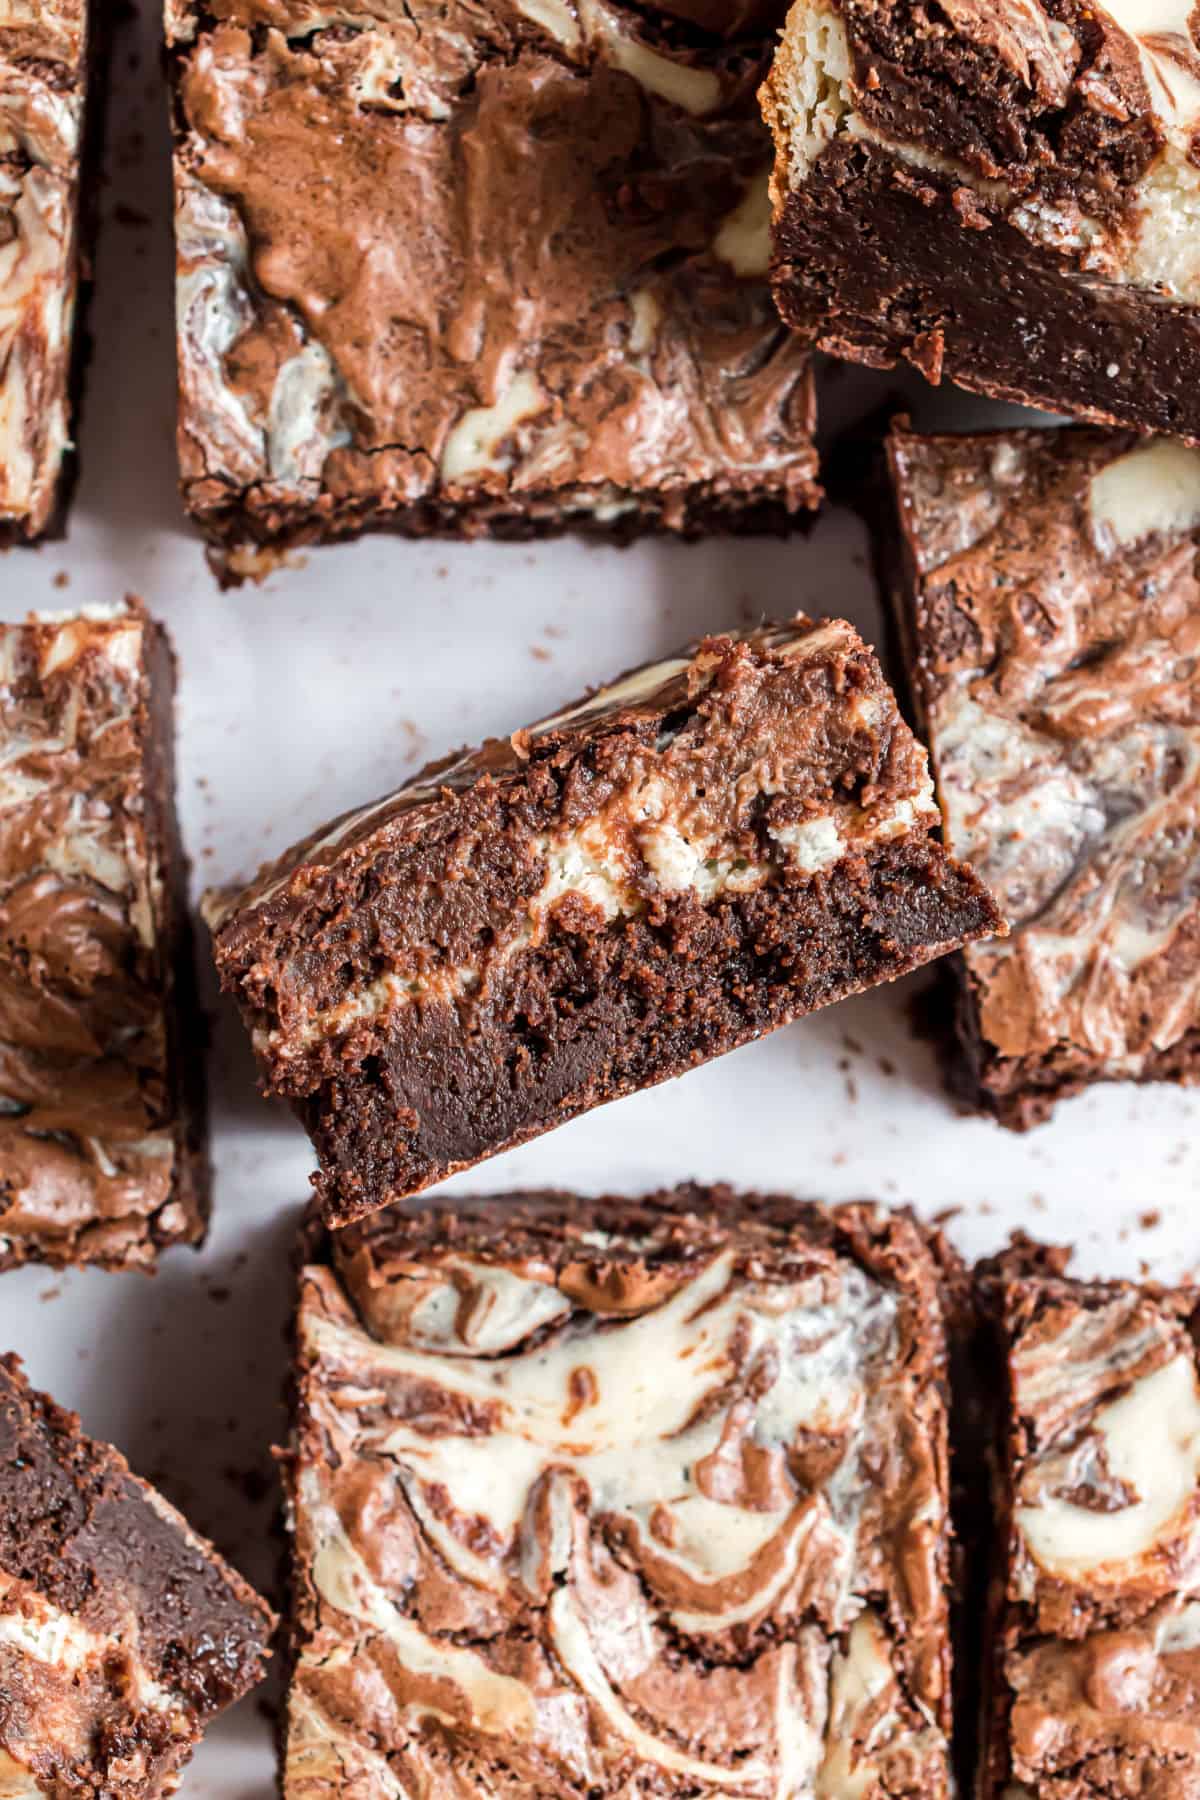 Brownies swirled with cheesecake topping cut into squares.